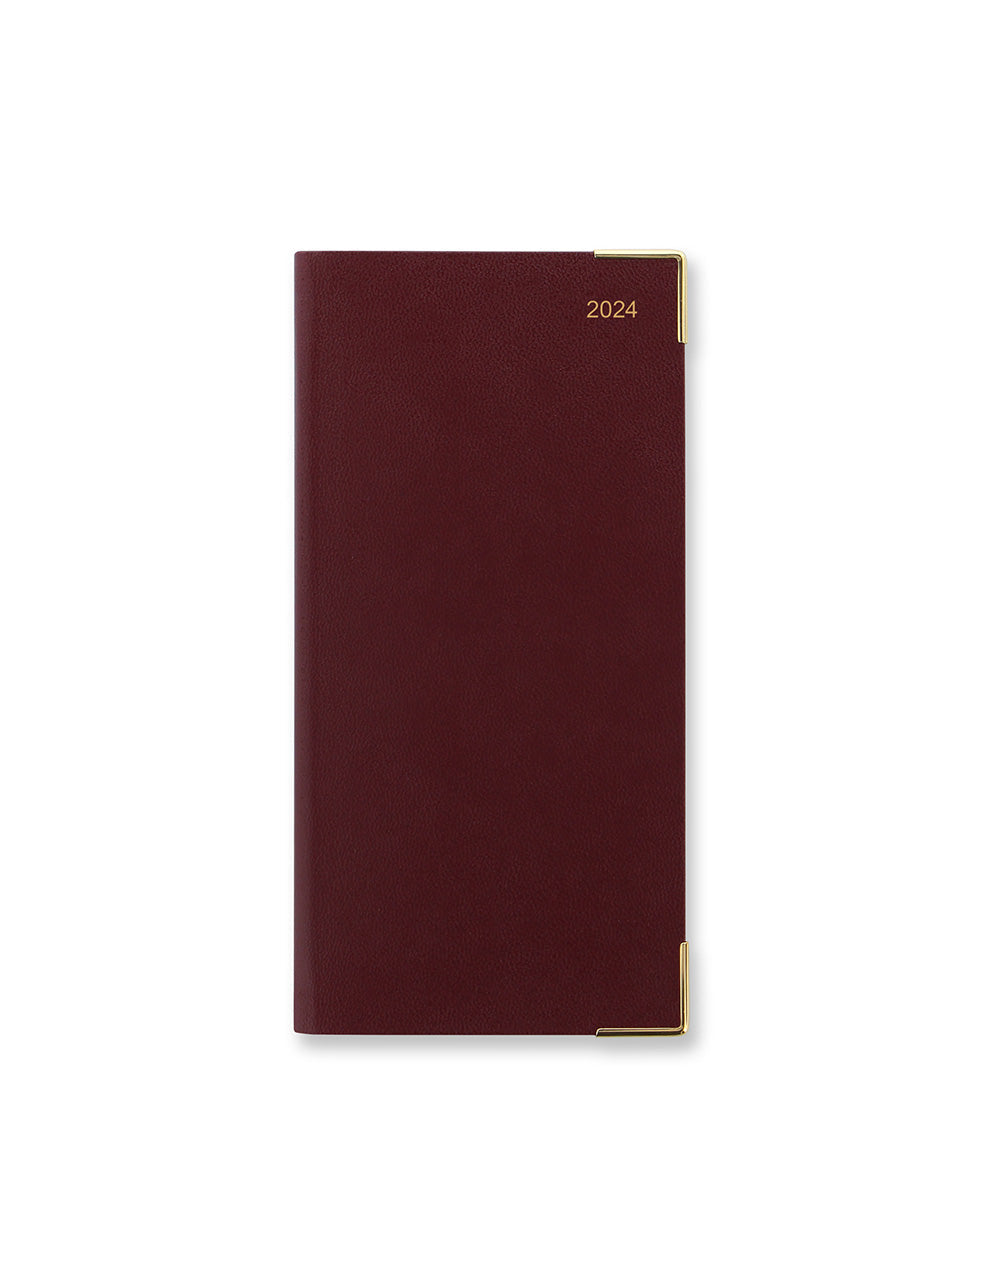 Letts of London 2024 Classic Slim Landscape Week to View Planner - Burgundy